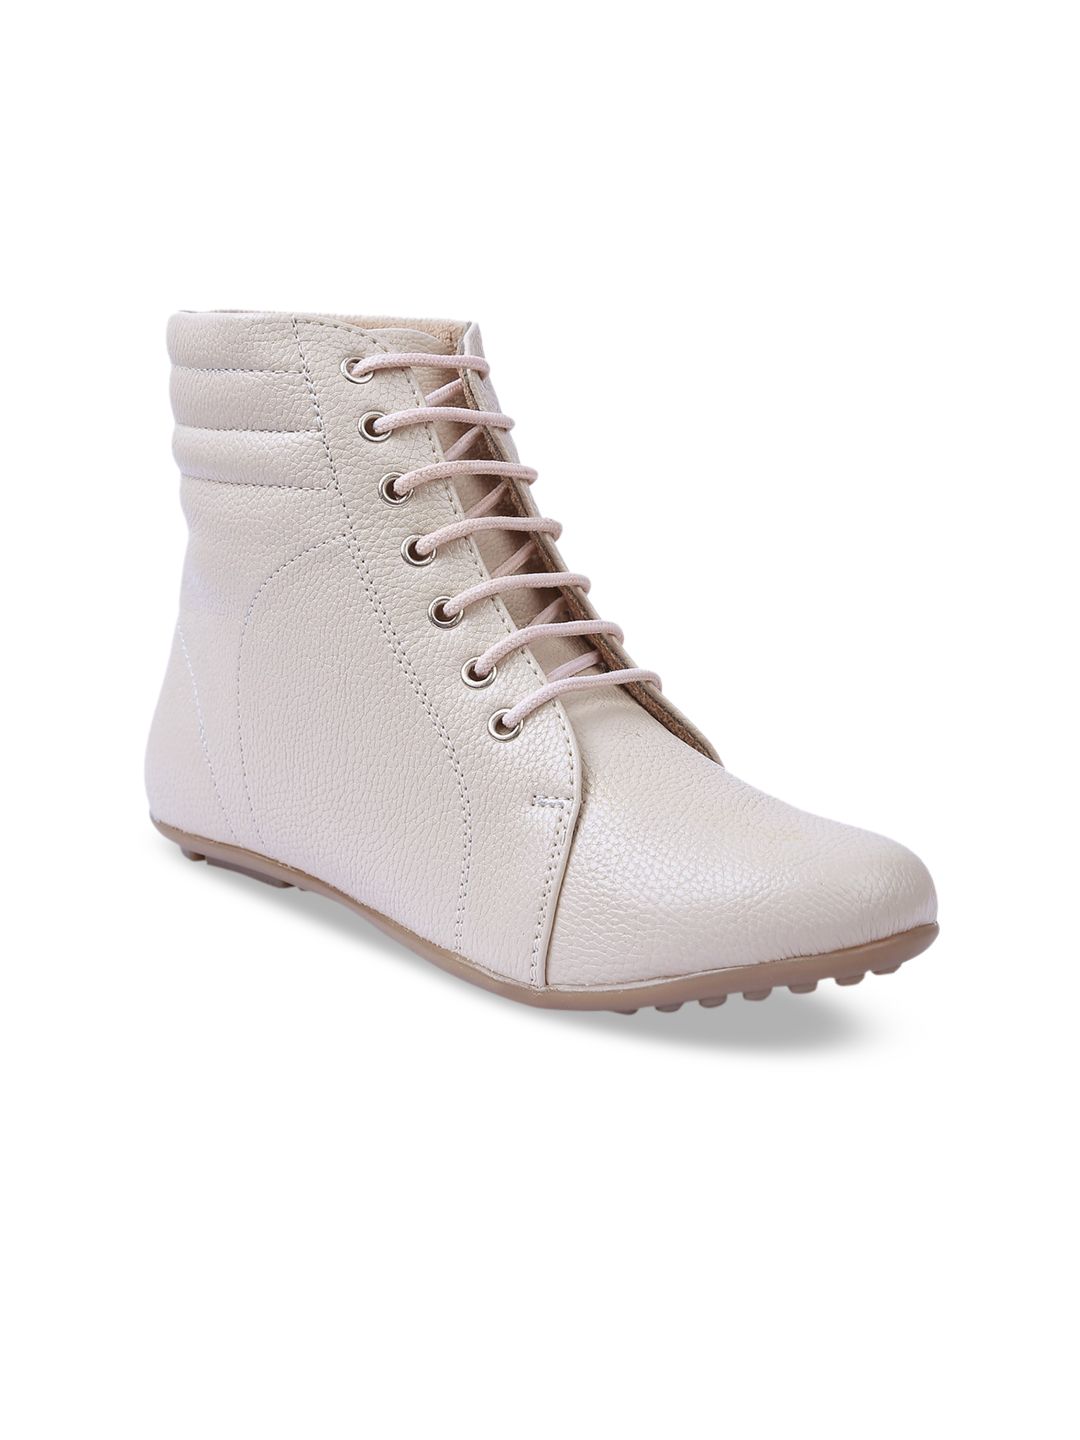 VALIOSAA Women Cream-Coloured Solid Synthetic Mid-Top Flat Boots Price in India